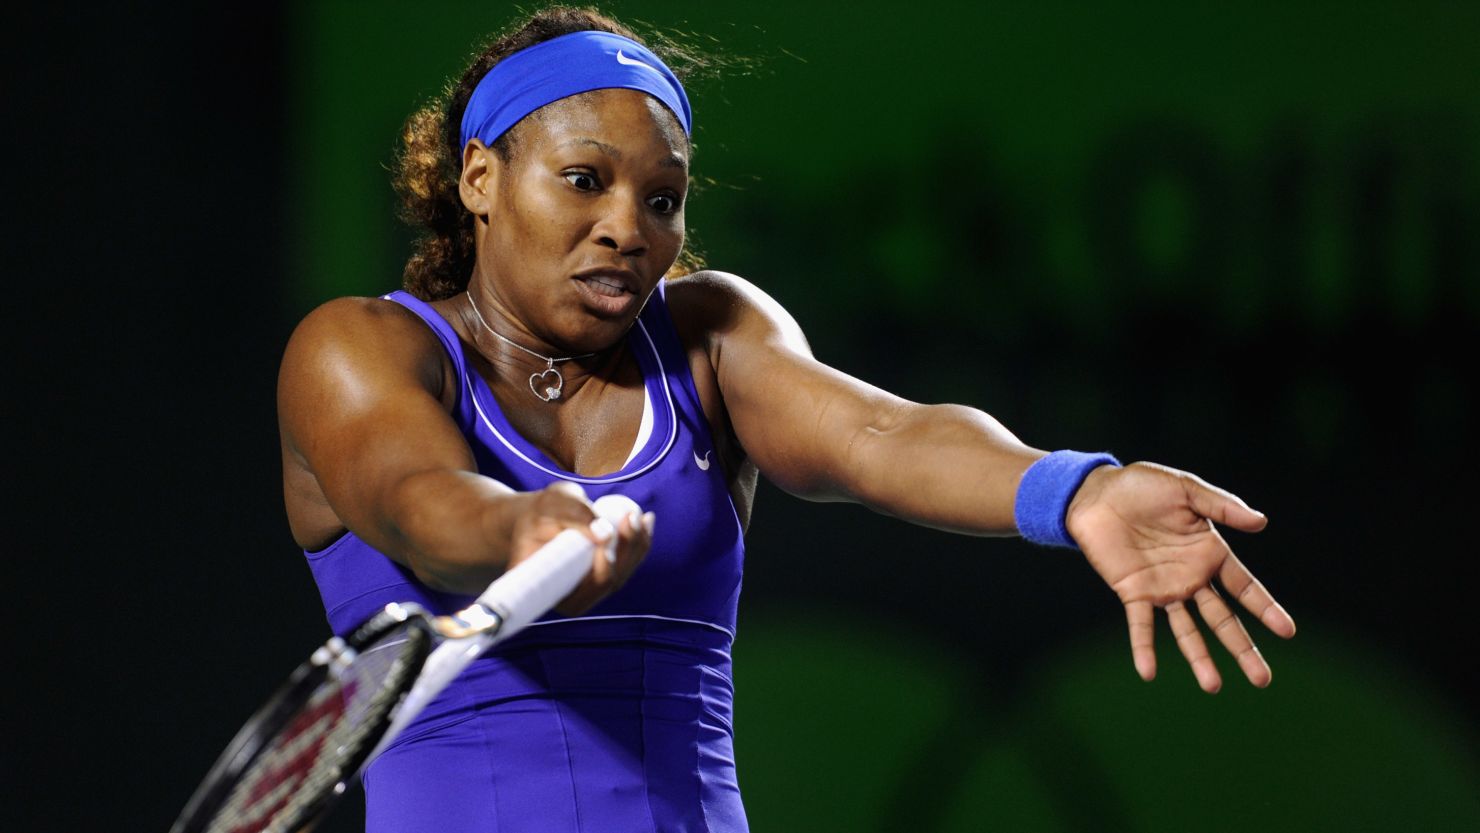 American tennis star Serena Williams is a five-time winner of the Miami hard-court tournament.